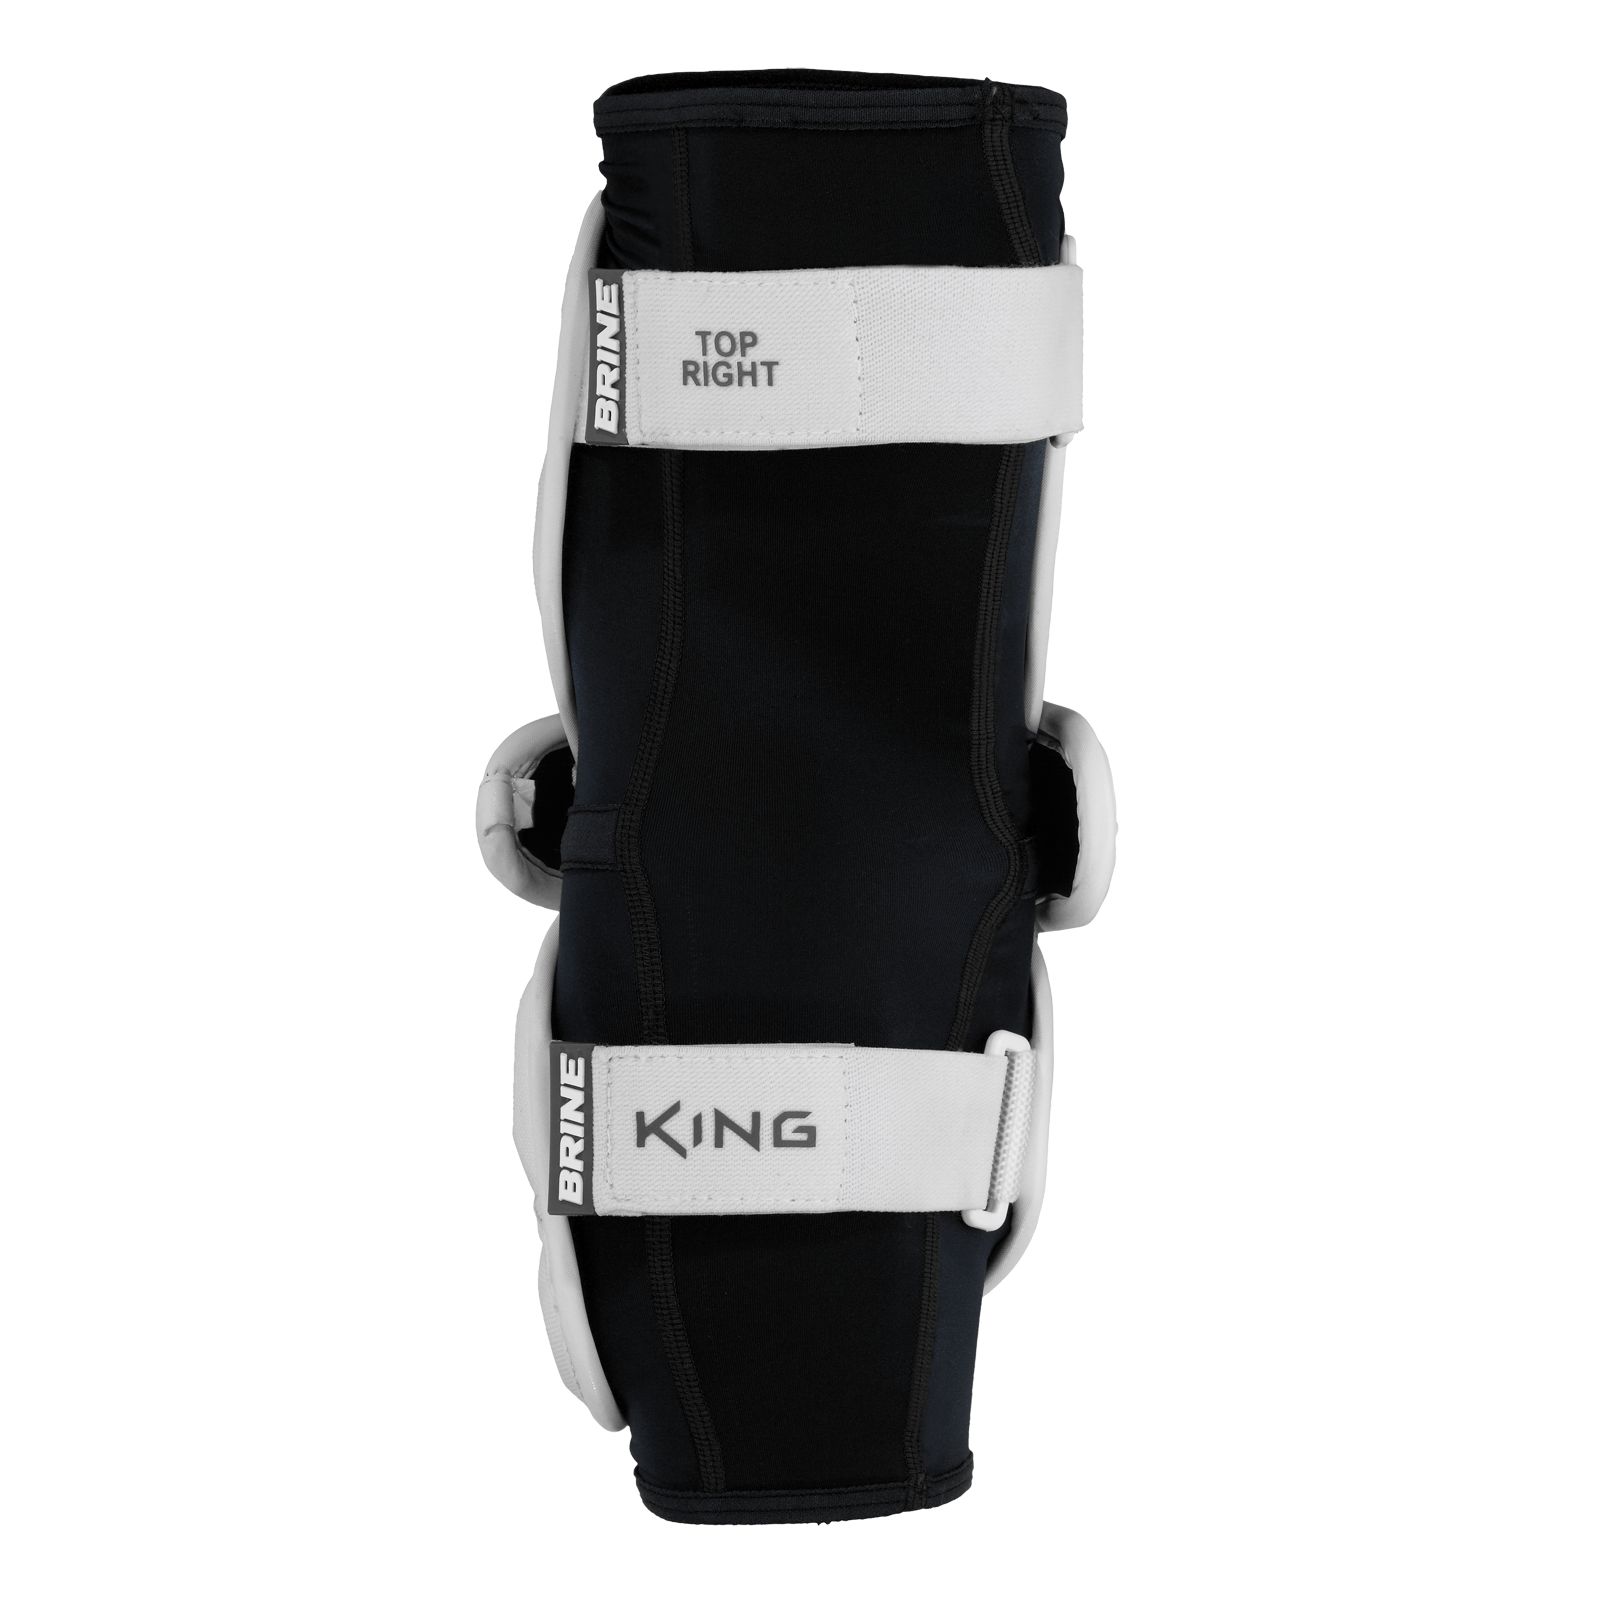 King V Arm Guard, Black with White image number 1